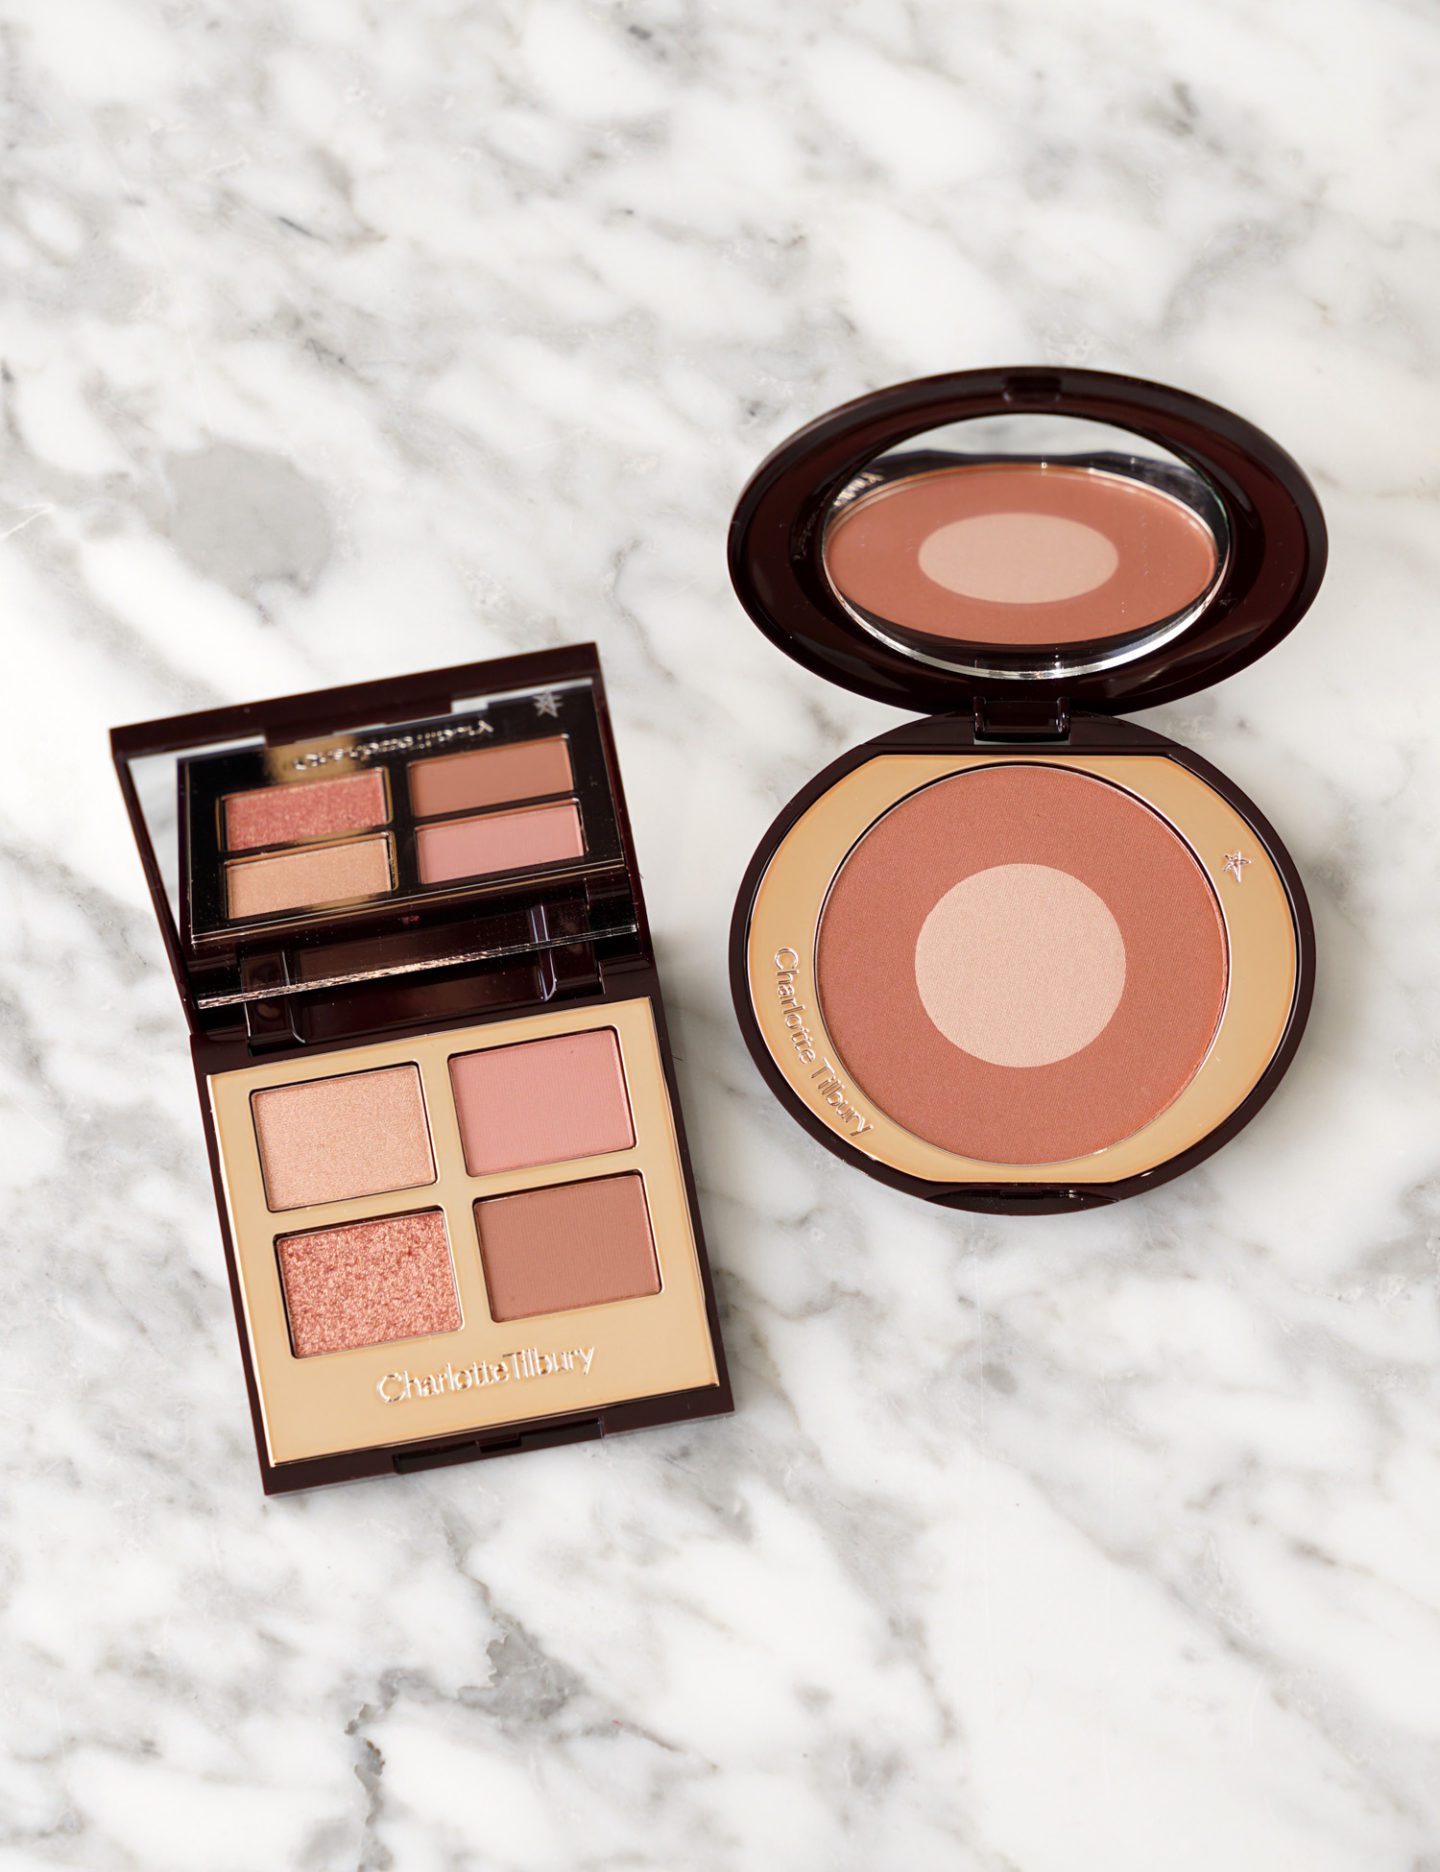 Charlotte Tilbury Pillow Talk Eyeshadow and Cheek to Chic Blush Review | The Beauty Look Book